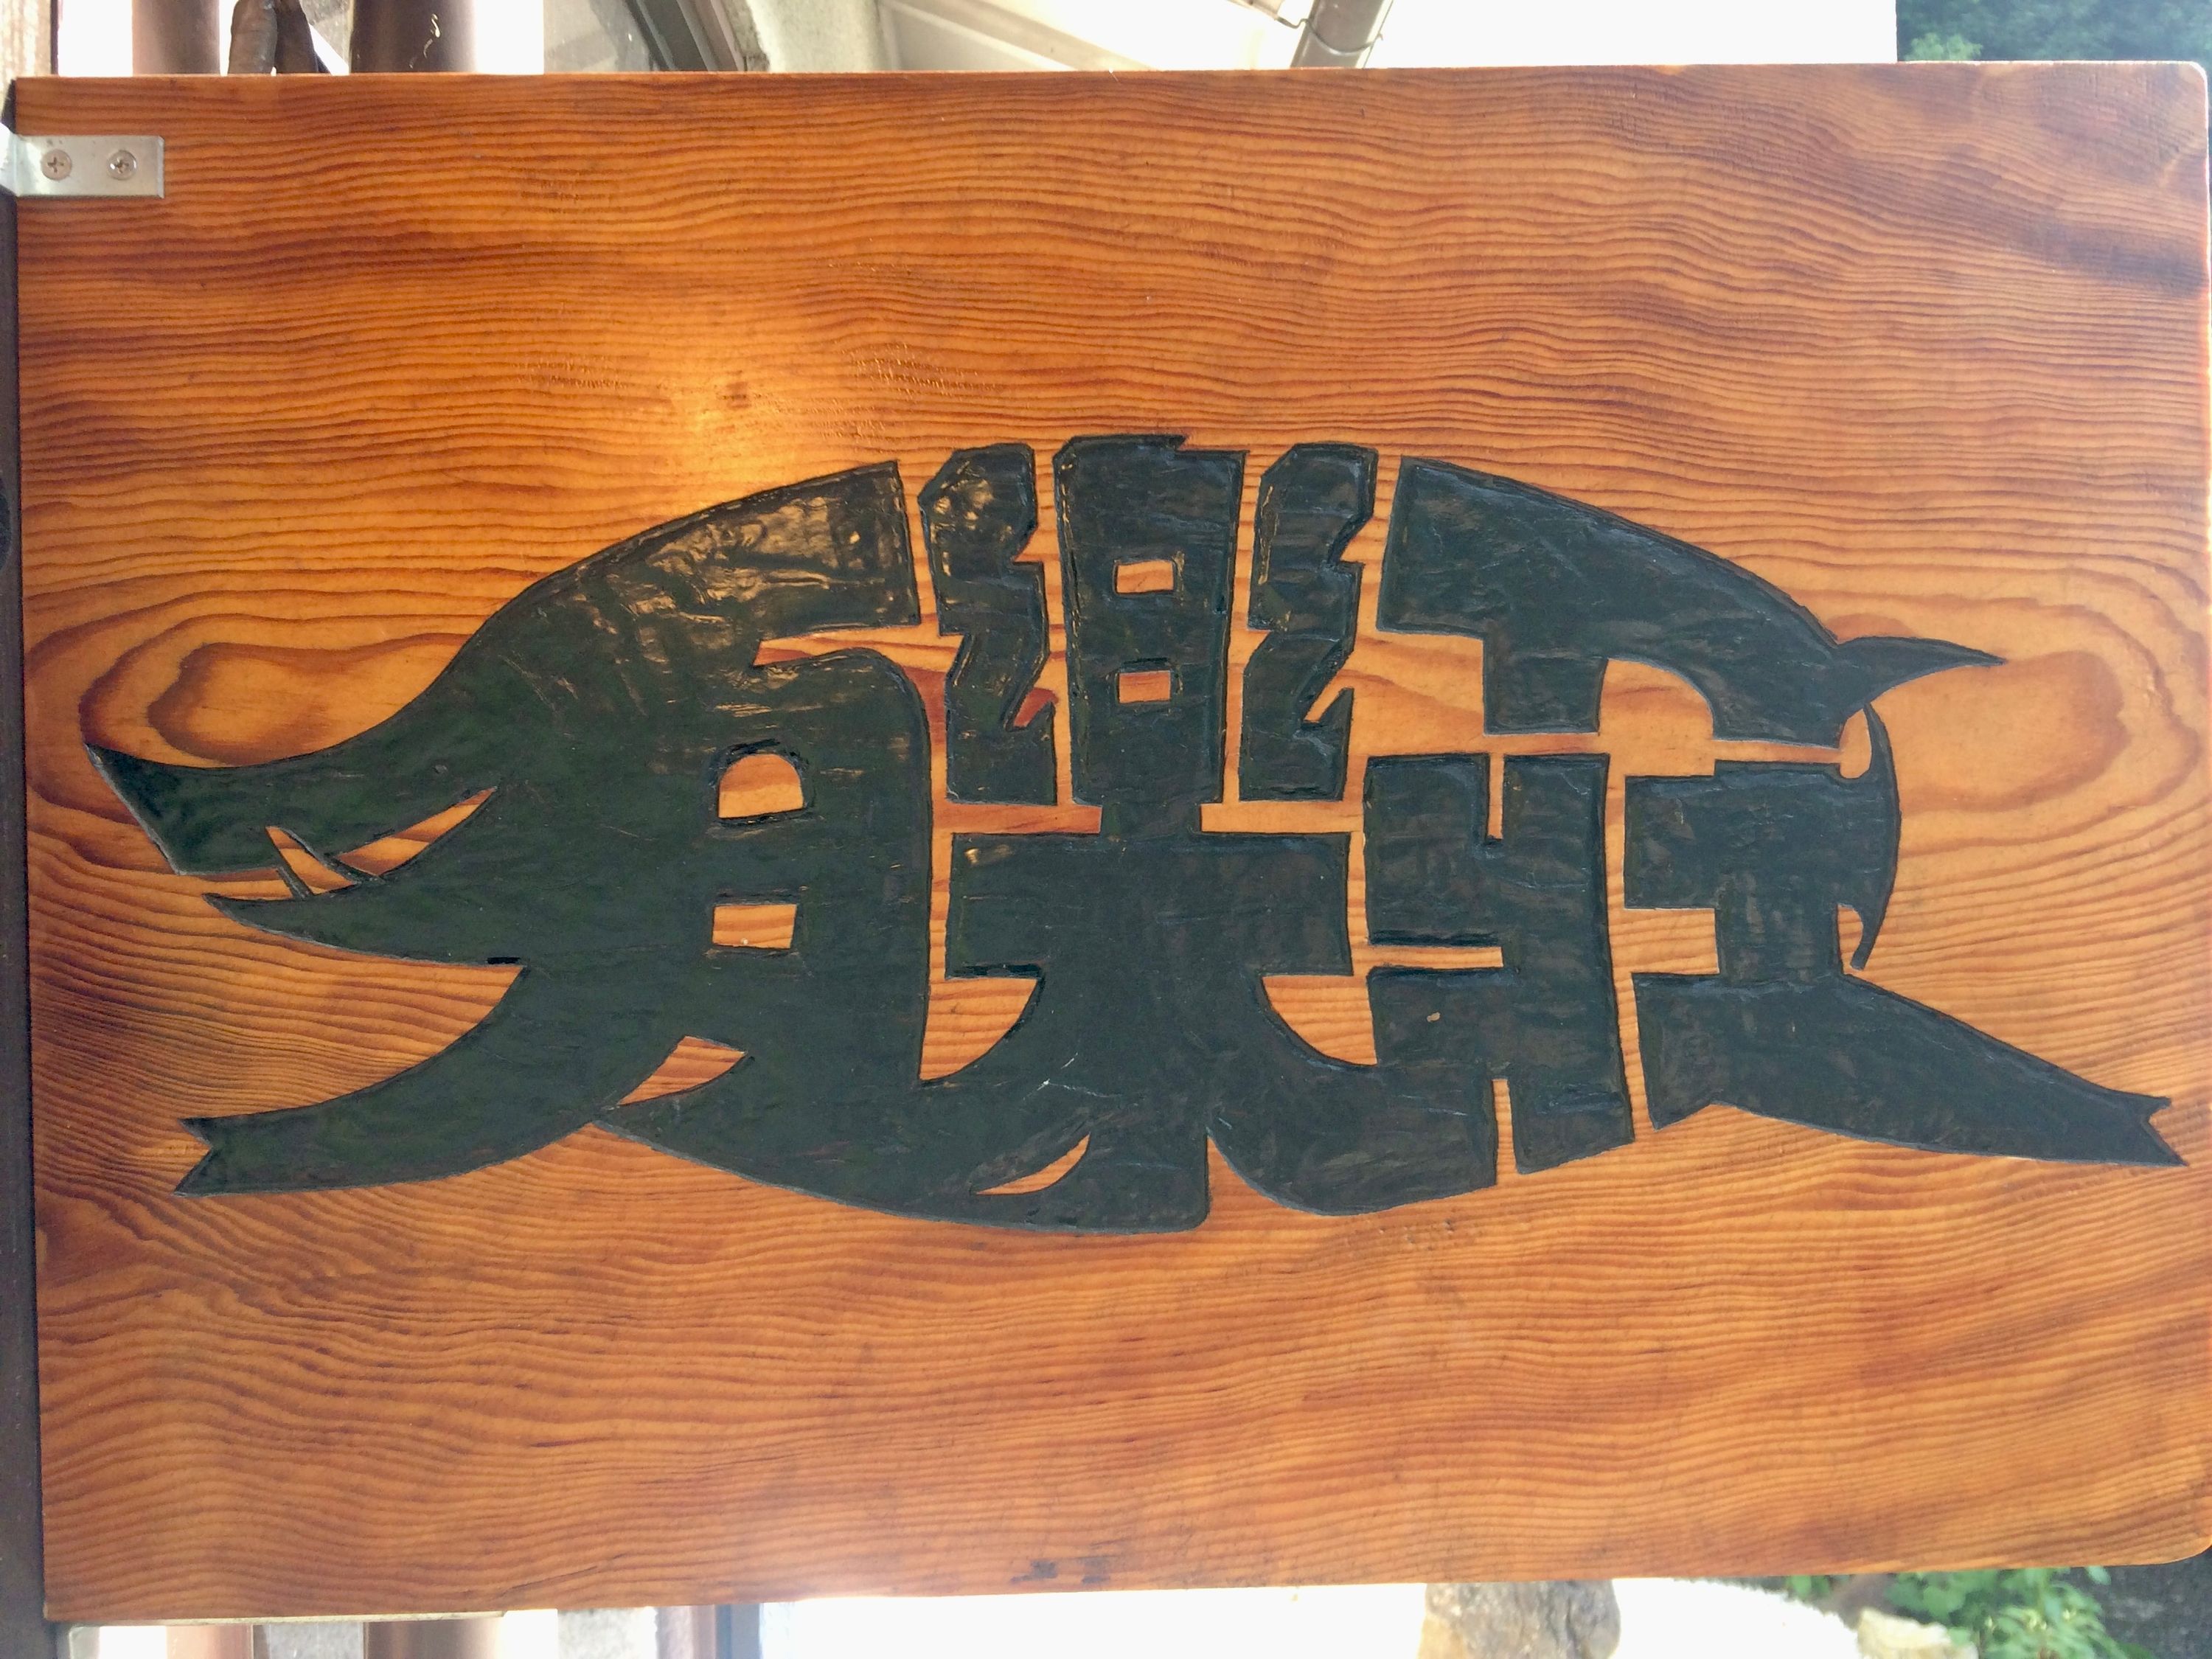 The calligraphic picture of a wild boar, made up of the characters 有楽荘, on a wooden board.